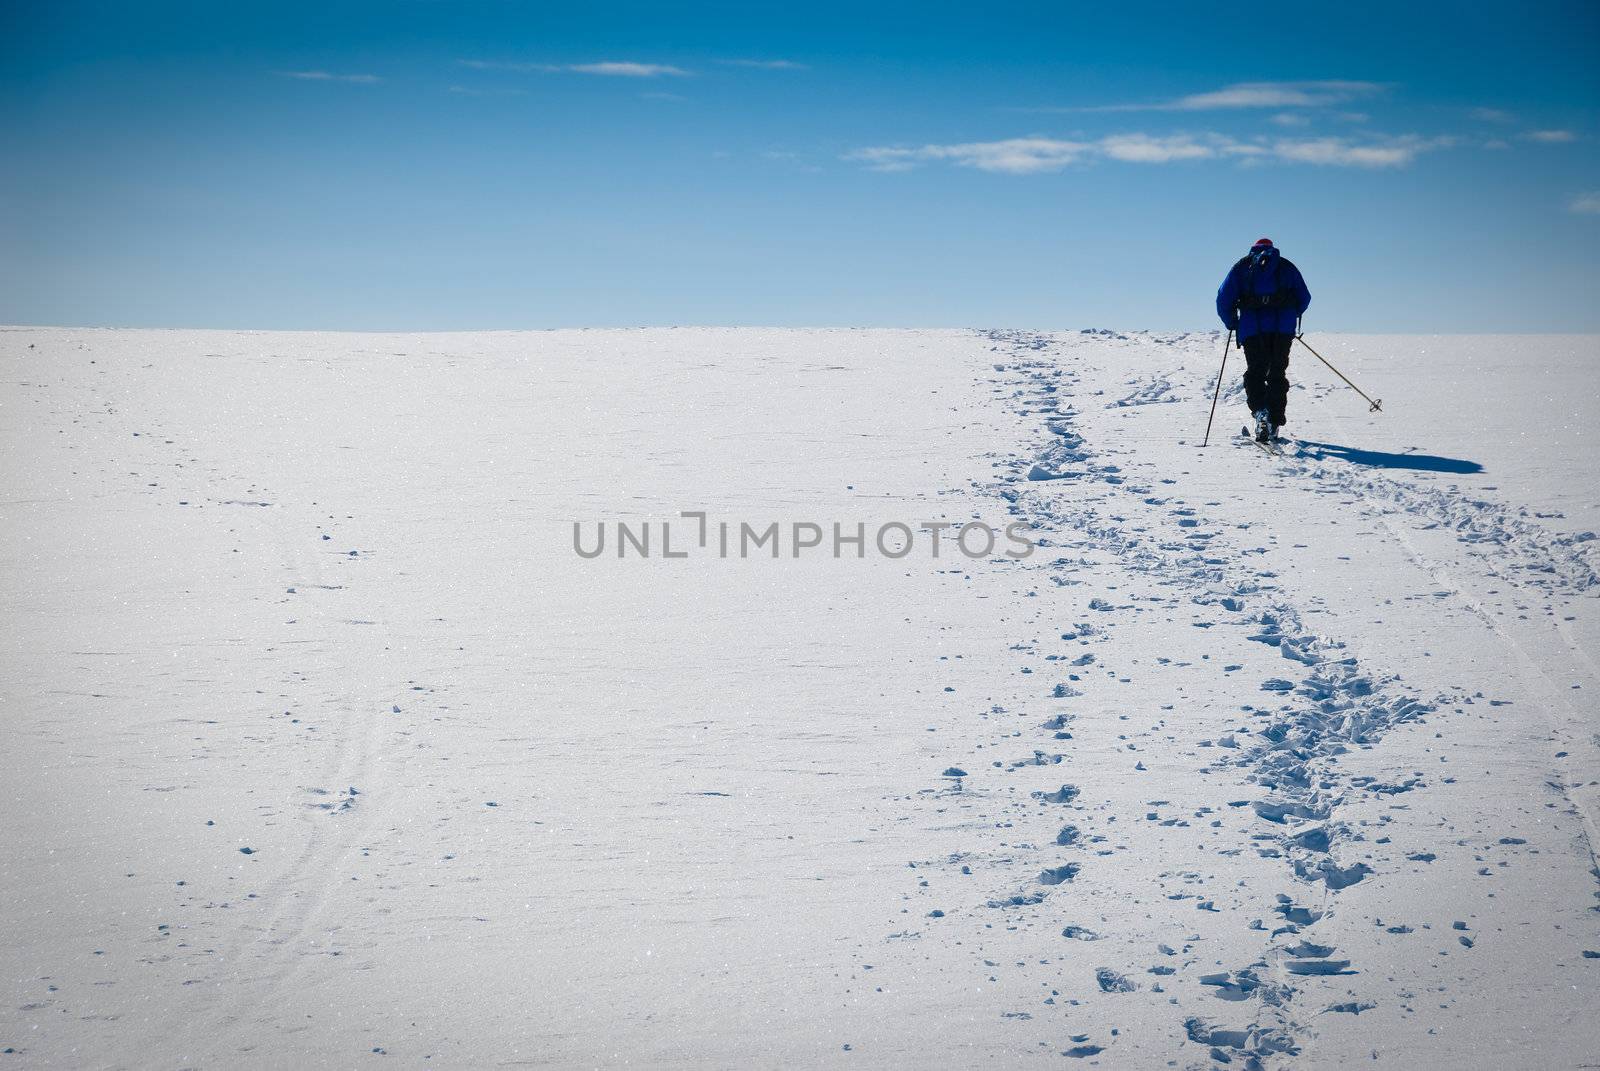 Man cross country skiing towards the horizon. Blue sky with some clouds. Limited DOF. Picture taken in Oppdal, Norway.